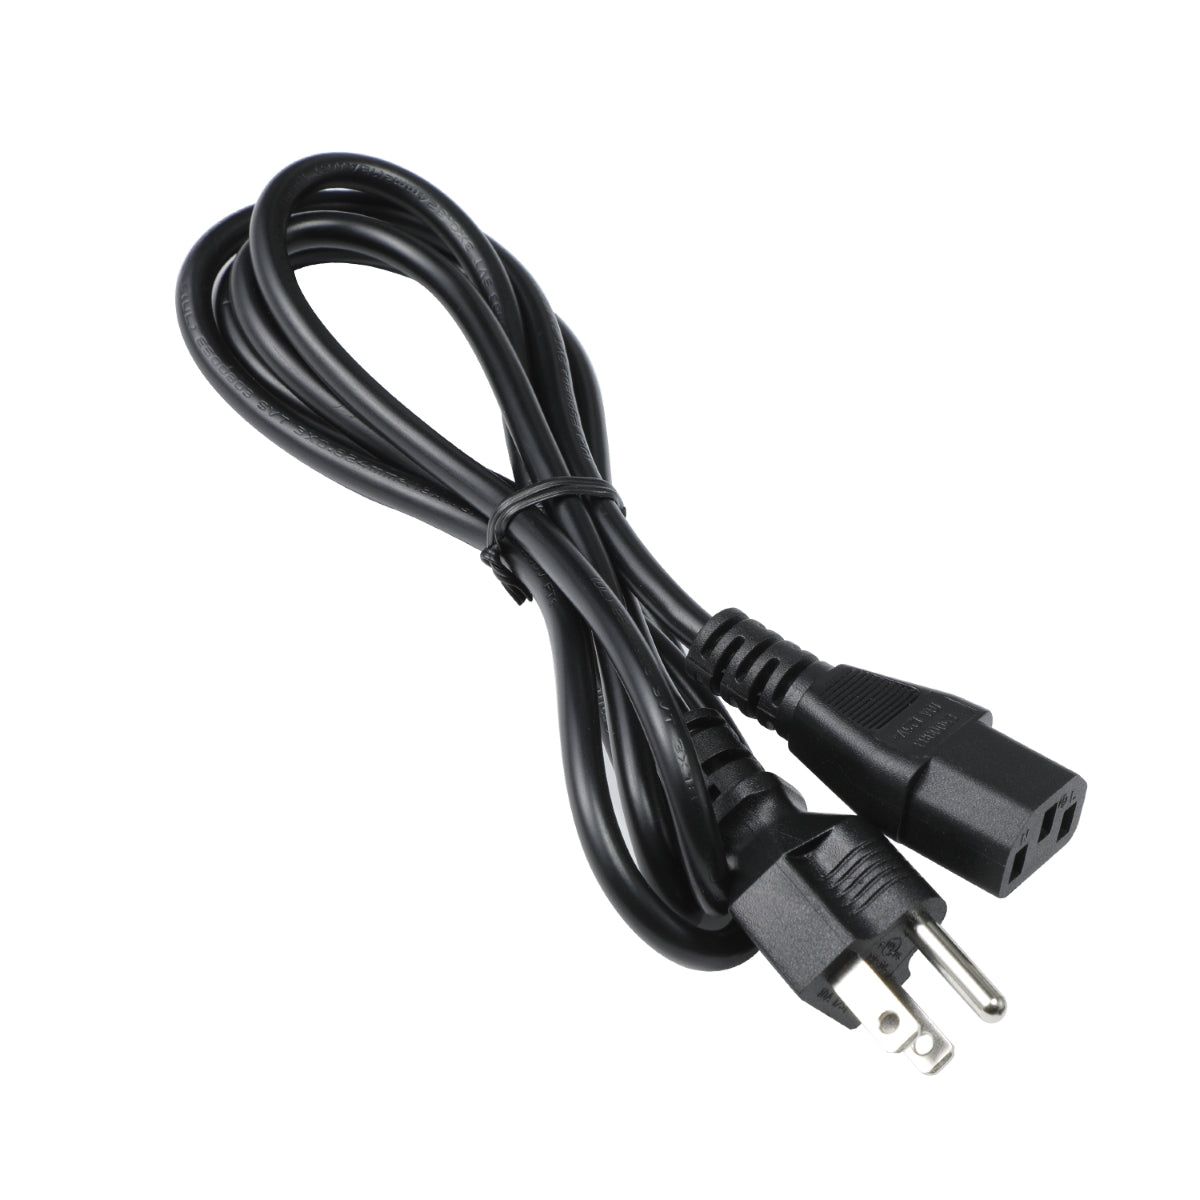 Power Cord for Samsung LS32A600NWNXGO Monitor TV.